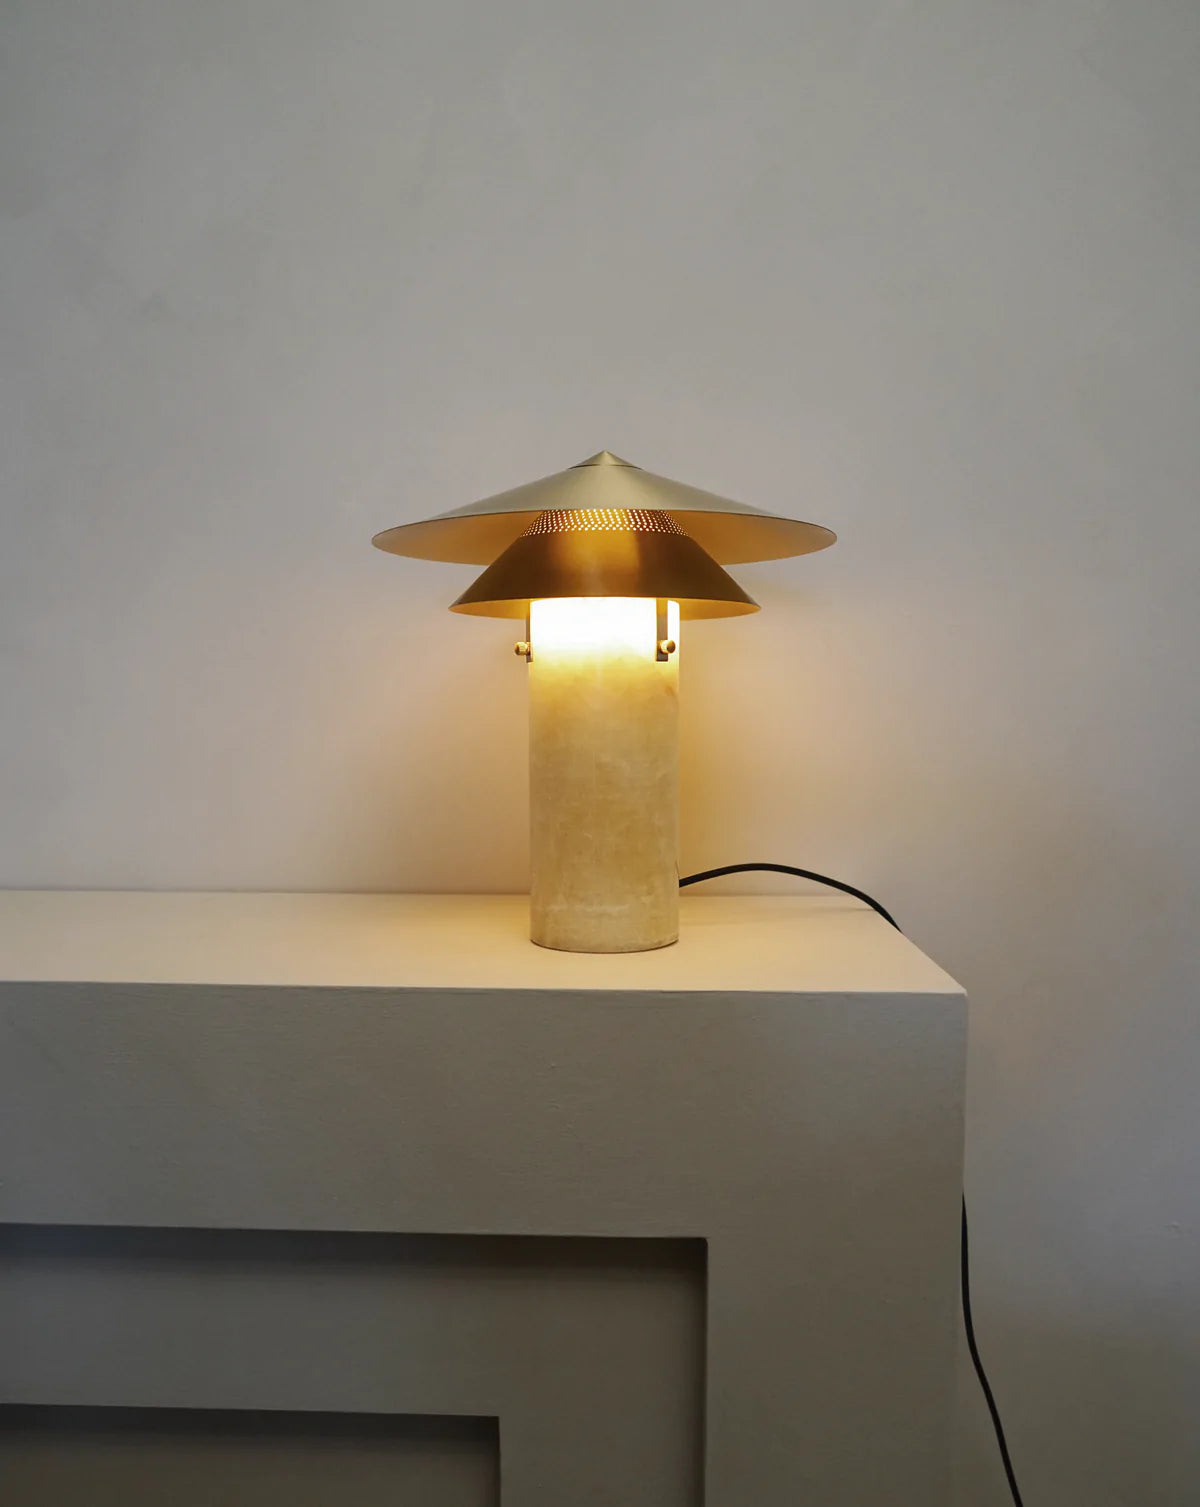 Meconopsis Onyx Table Lamp